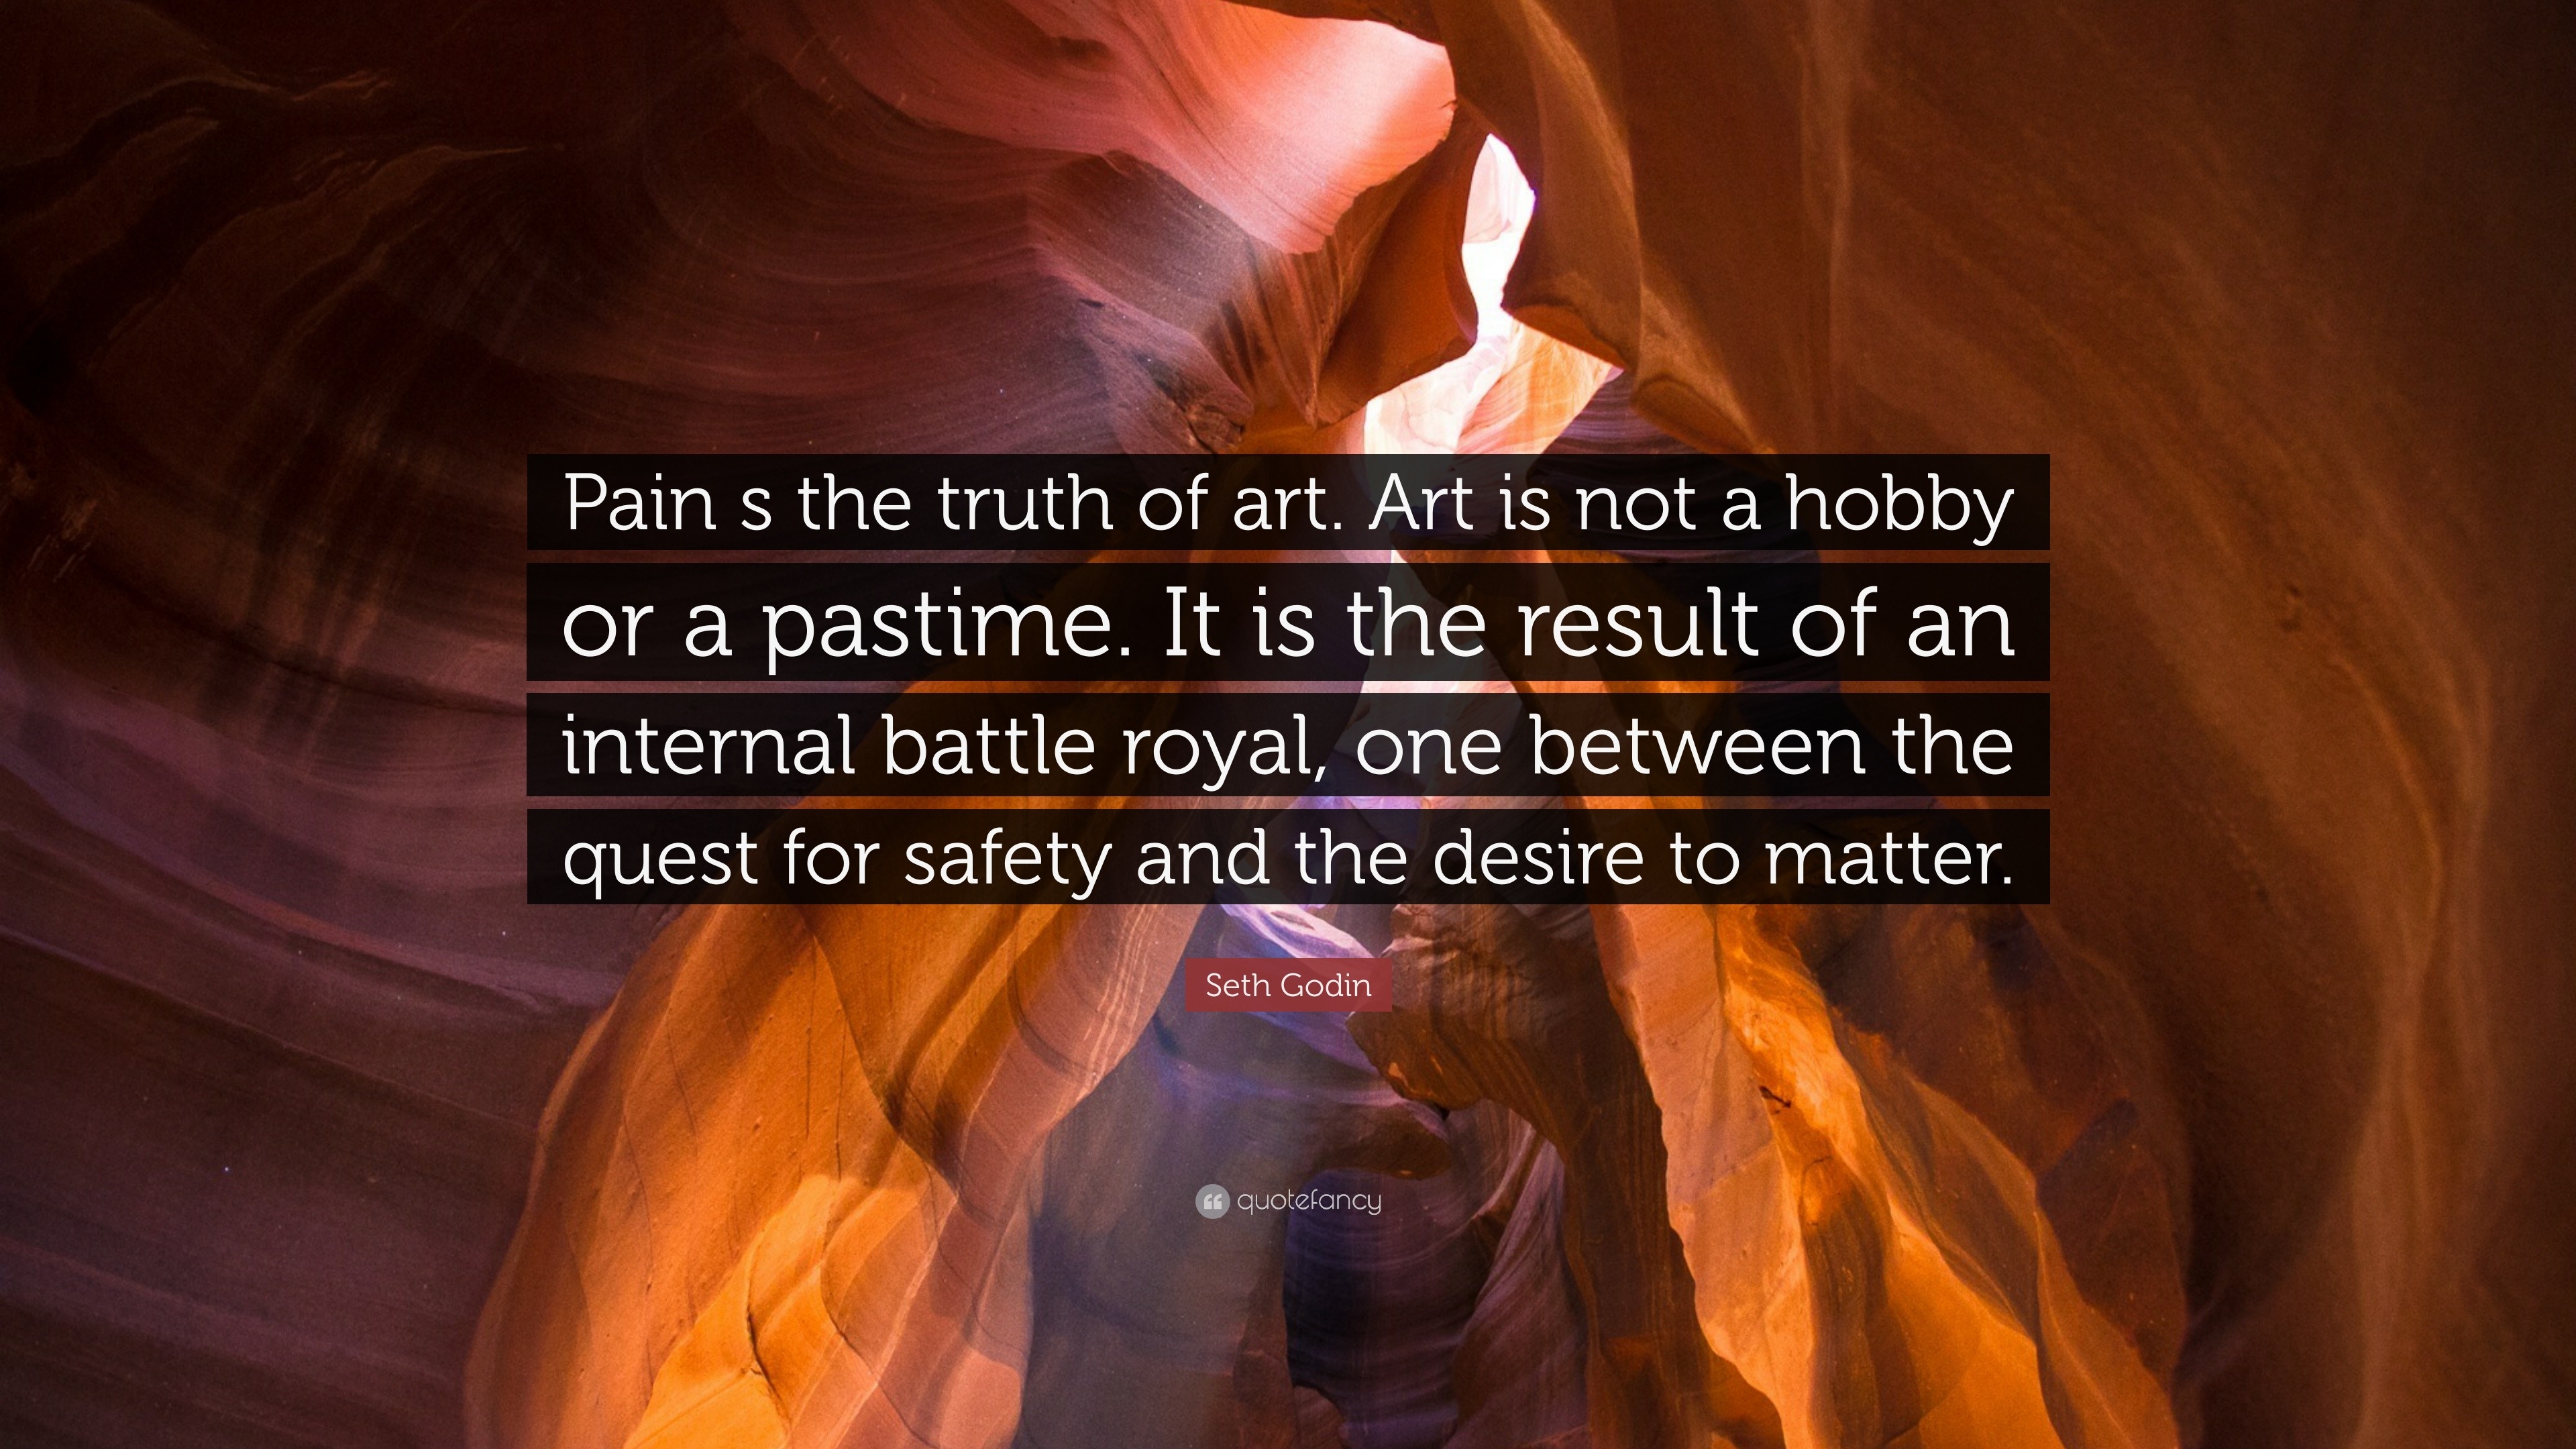 Seth Godin Quote Pain S The Truth Of Art Art Is Not A Hobby Or A Pastime It Is The Result Of An Internal Battle Royal One Between The